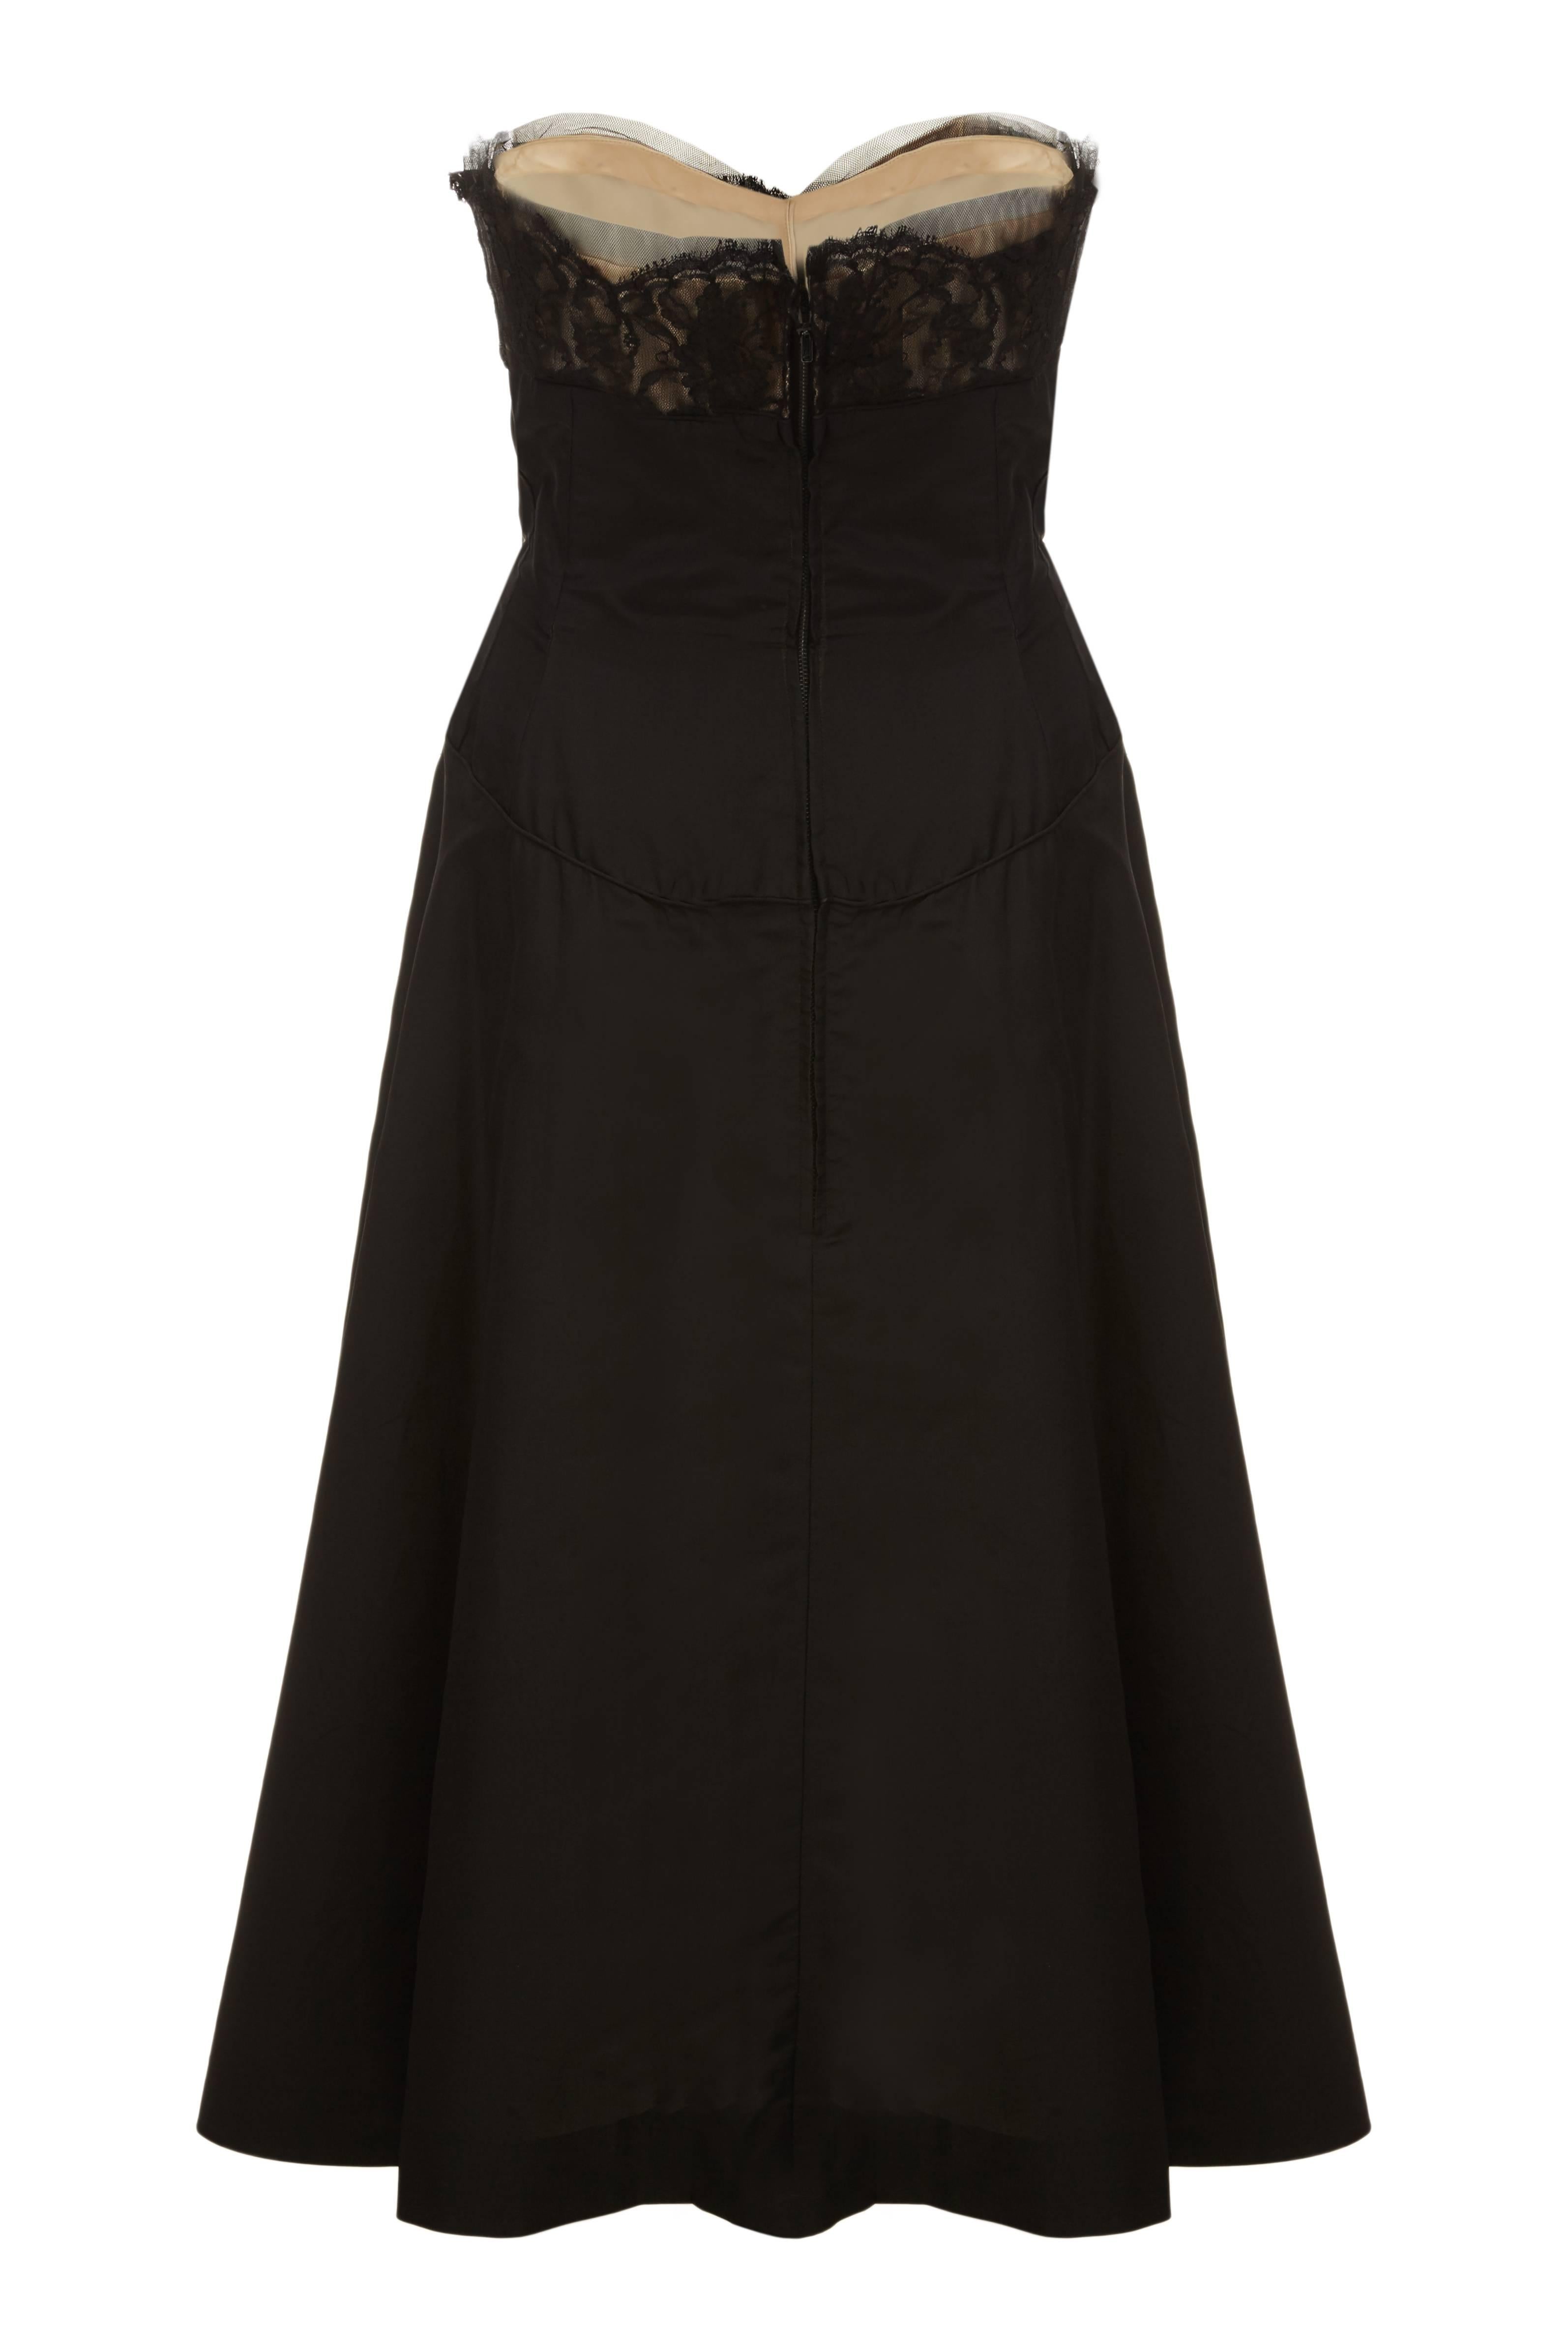 This seductive 1950s black silk satin cocktail dress is of superb quality and construction and in superb vintage condition. The dress features a sweetheart neckline in soft black netting with a nude satin underlay and lace ruffle embellishment over